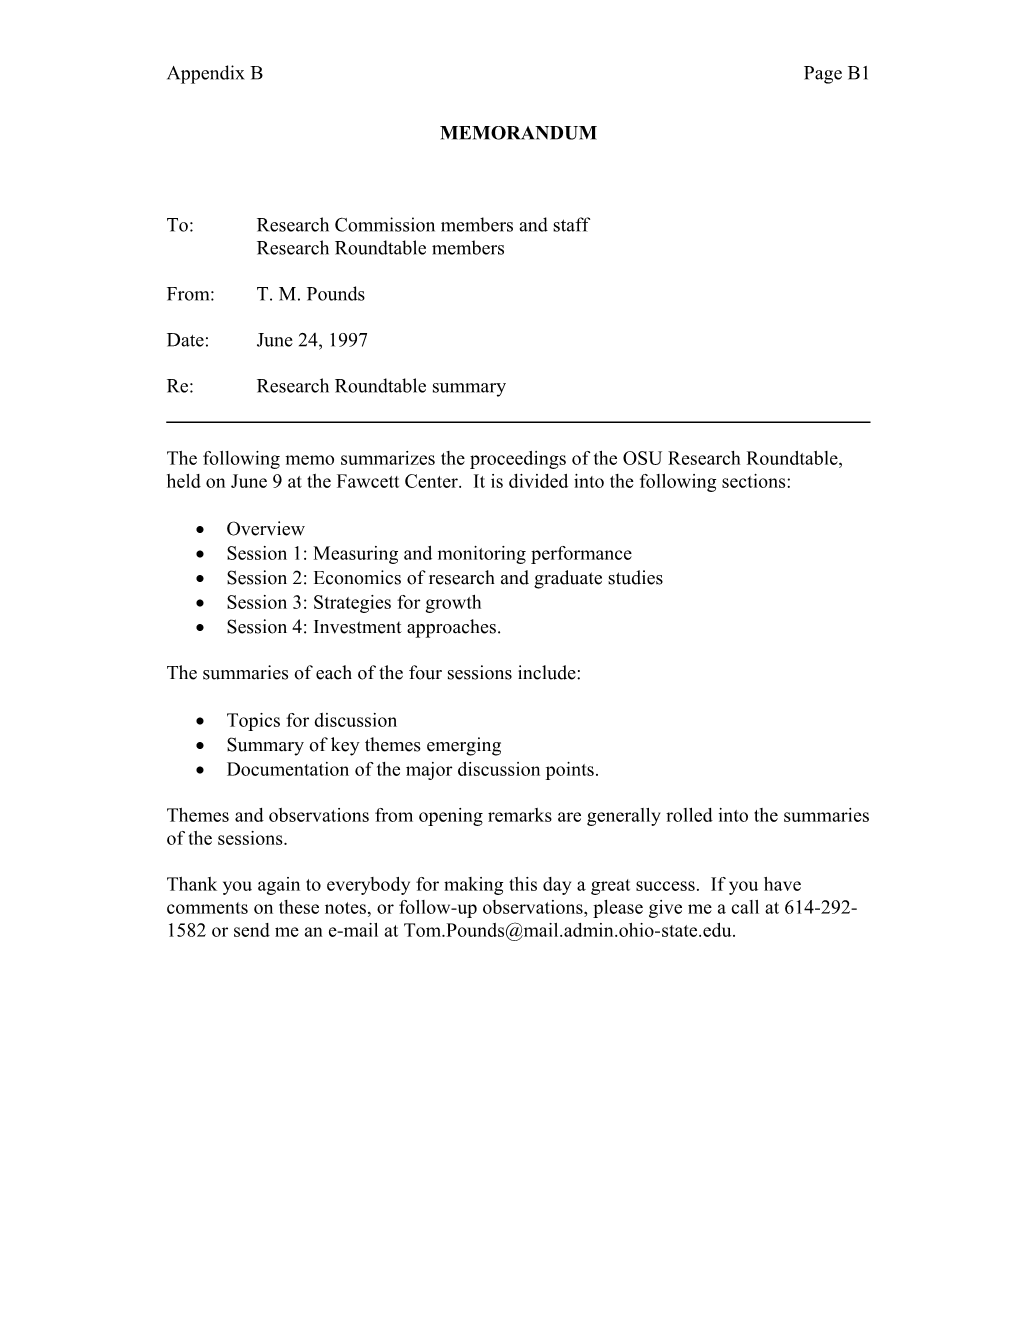 Appendix B: OSU Research Roundtable Discussion Notes Page B4